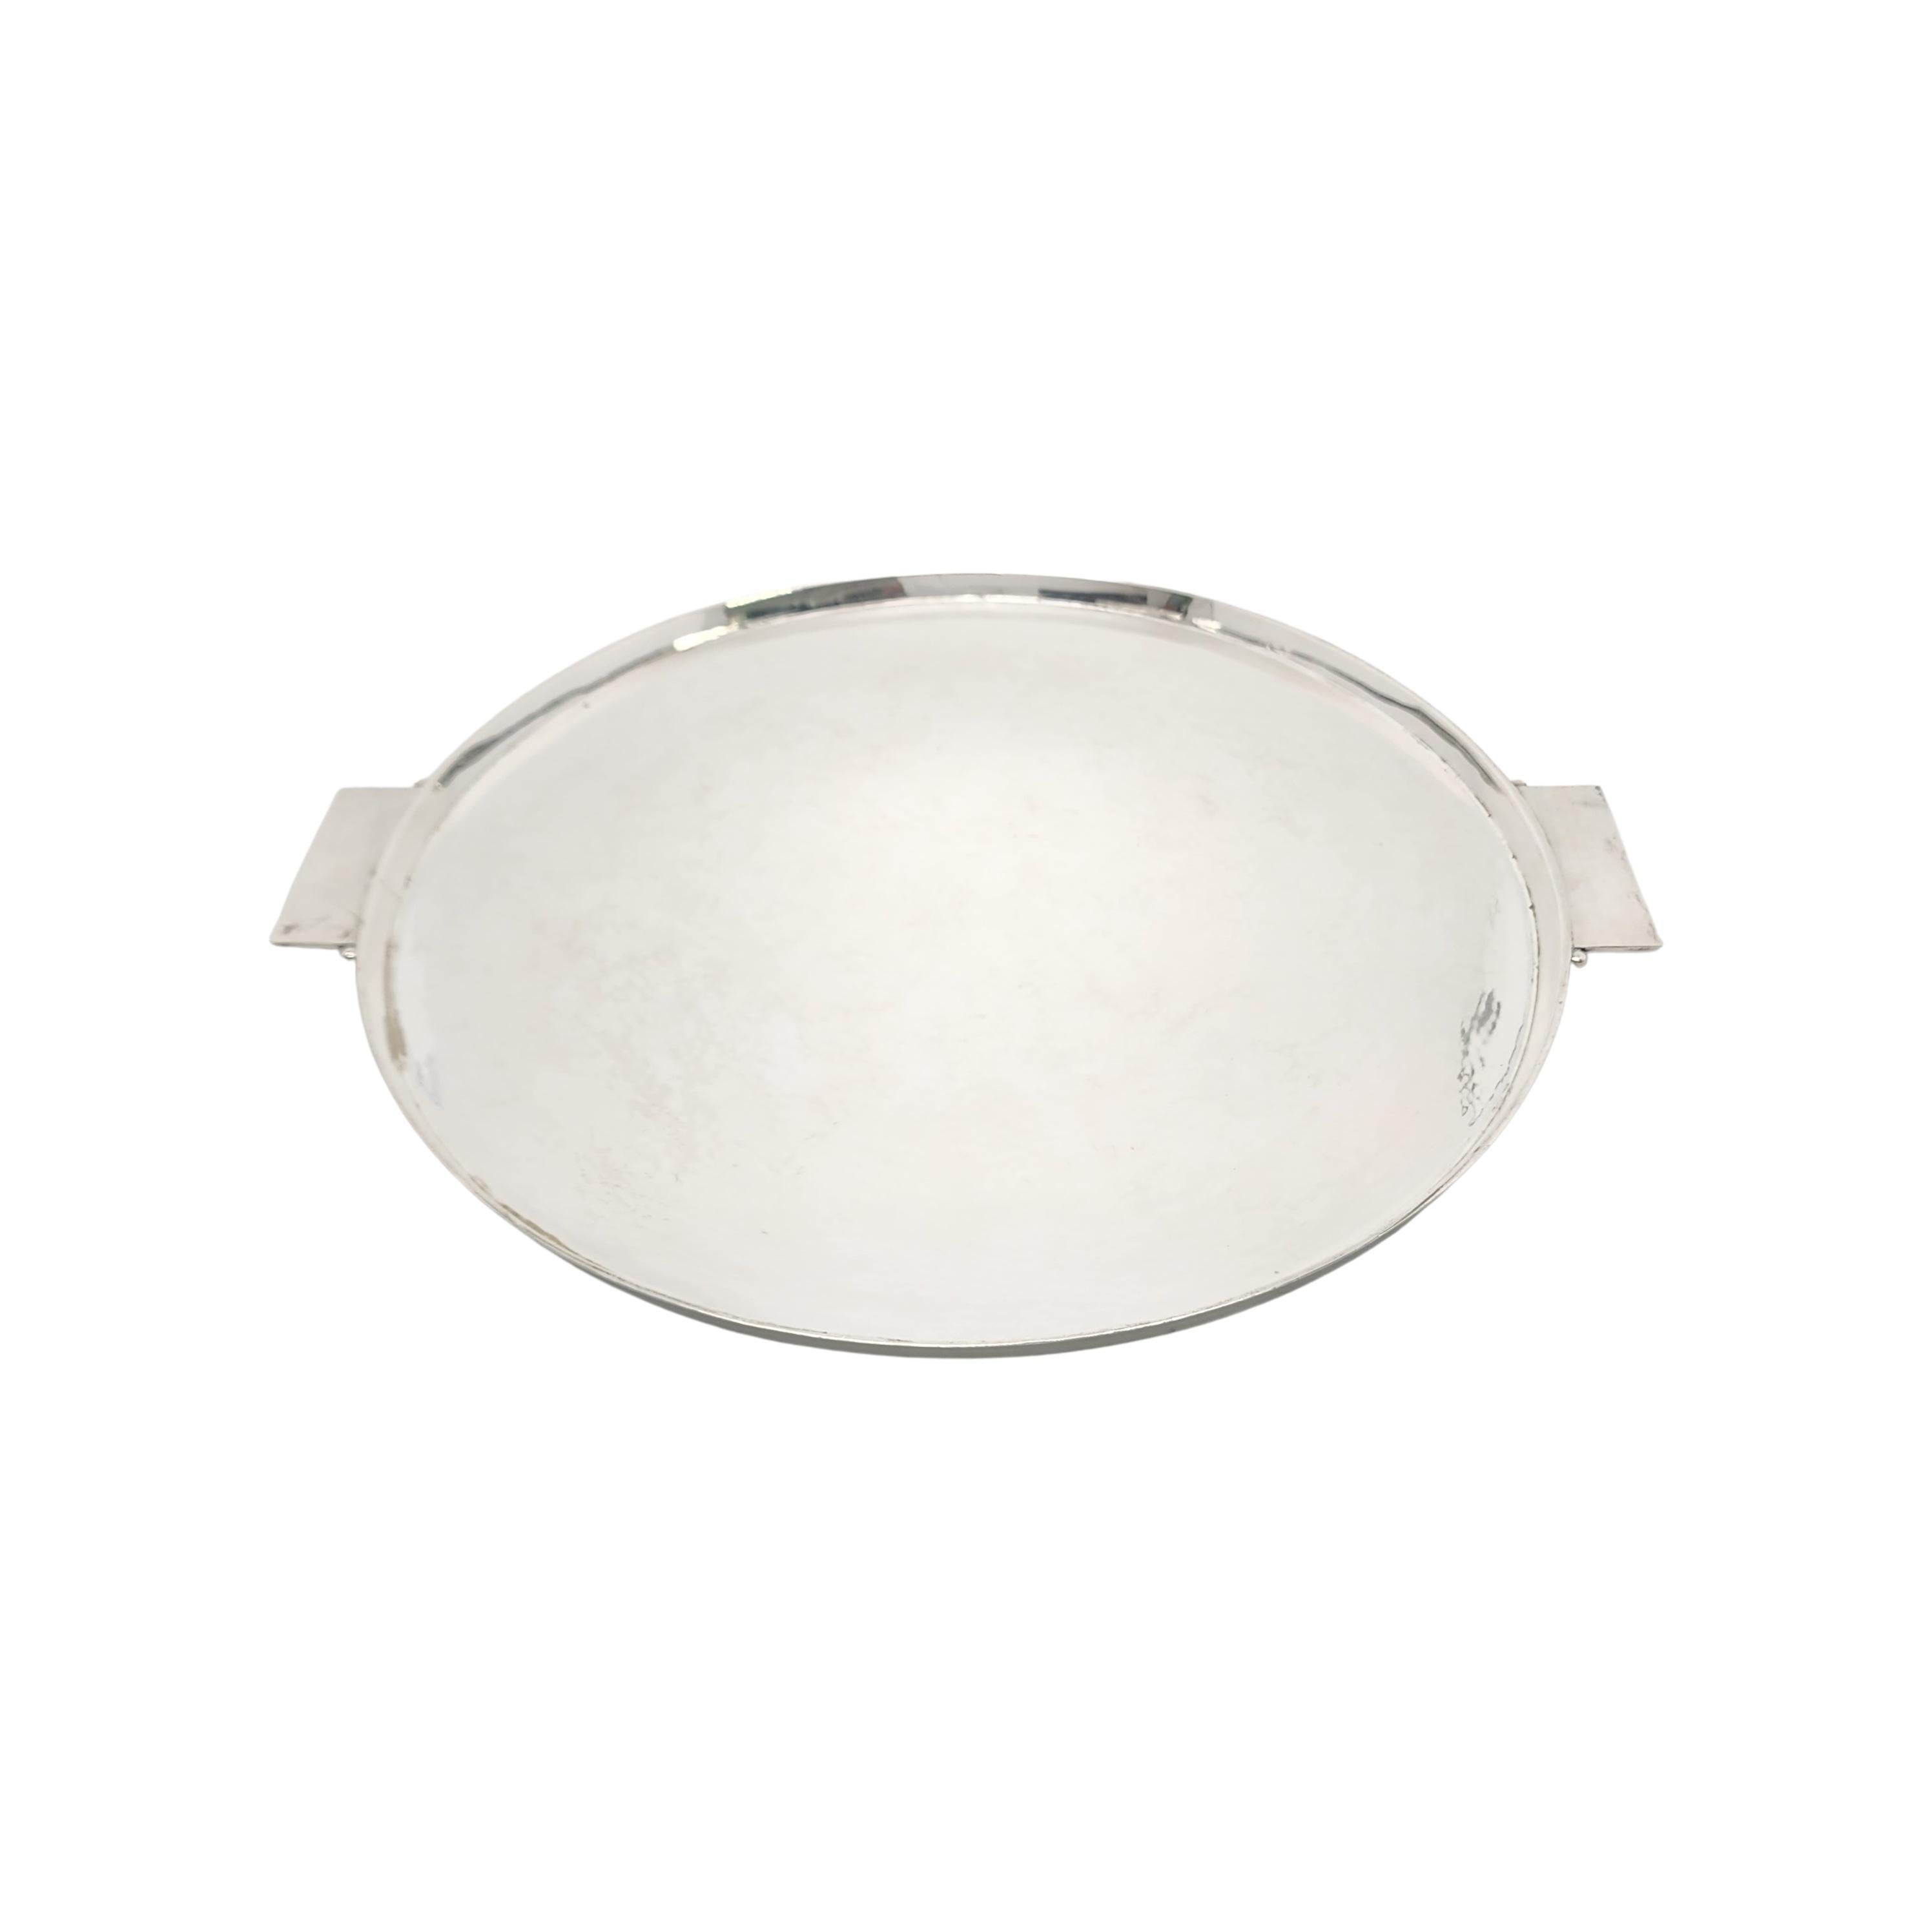 Sterling silver round tray by Georg Jensen Denmark, circa 1928.

Pattern # 529, created by long-time Jensen designer Johan Rohde, this large round tray features a lightly hammered finish, rectangular handles adorned with silver beads on each side of